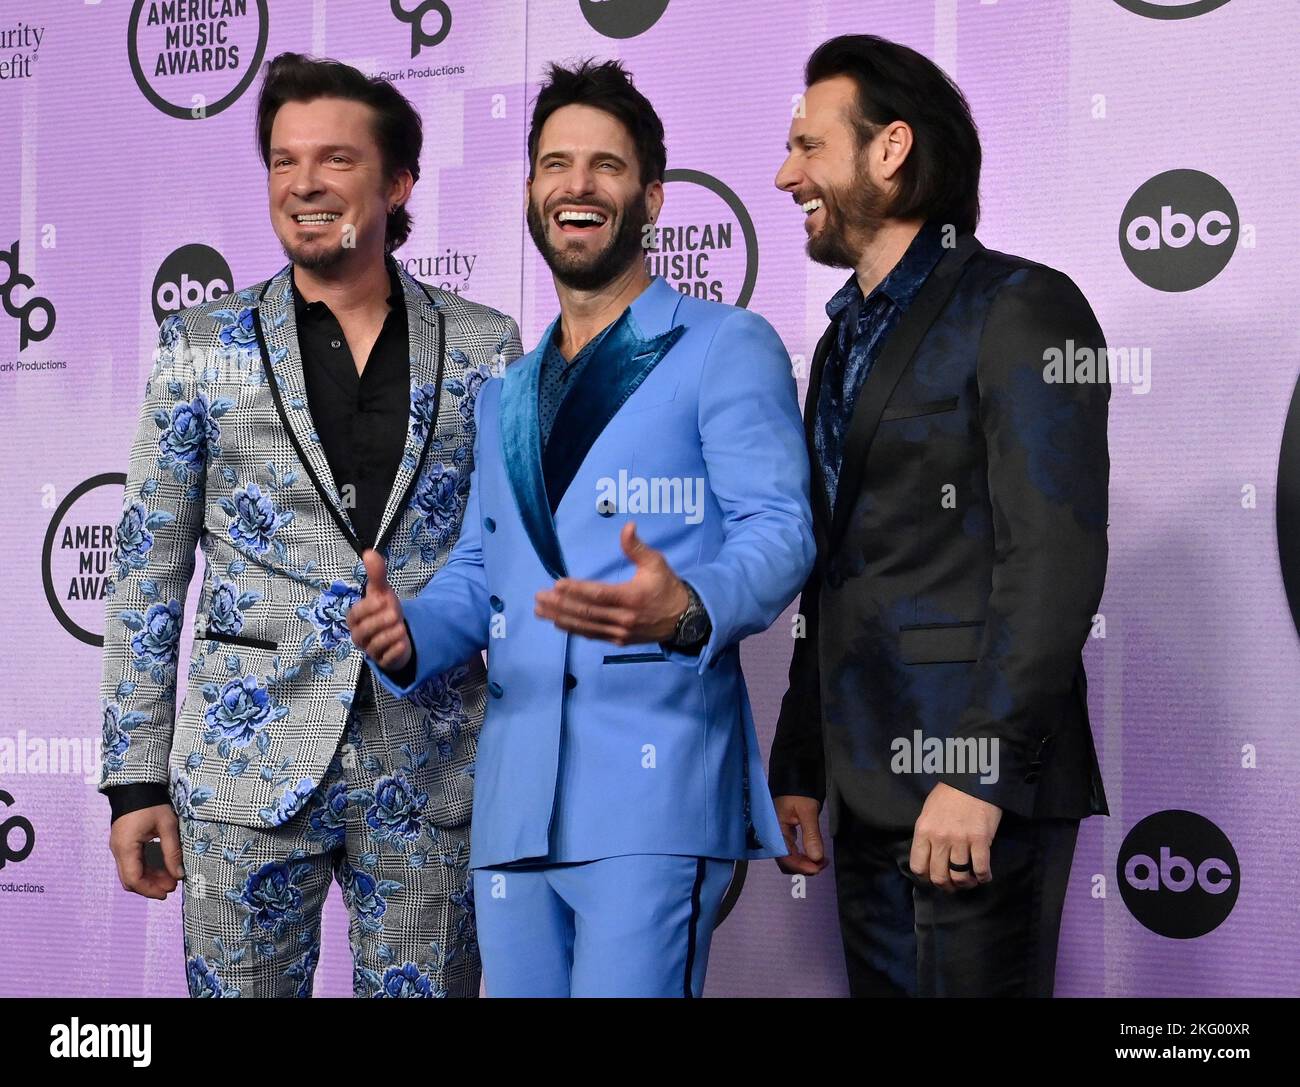 Los Angeles, United States. 20th Nov, 2022. (L-R) Josh McSwain, Matt Thomas and Scott Thomas of Parmalee arrive for the 50th annual American Music Awards at the Microsoft Theater in Los Angeles on Sunday, November 20, 2022. Photo by Jim Ruymen/UPI Credit: UPI/Alamy Live News Stock Photo